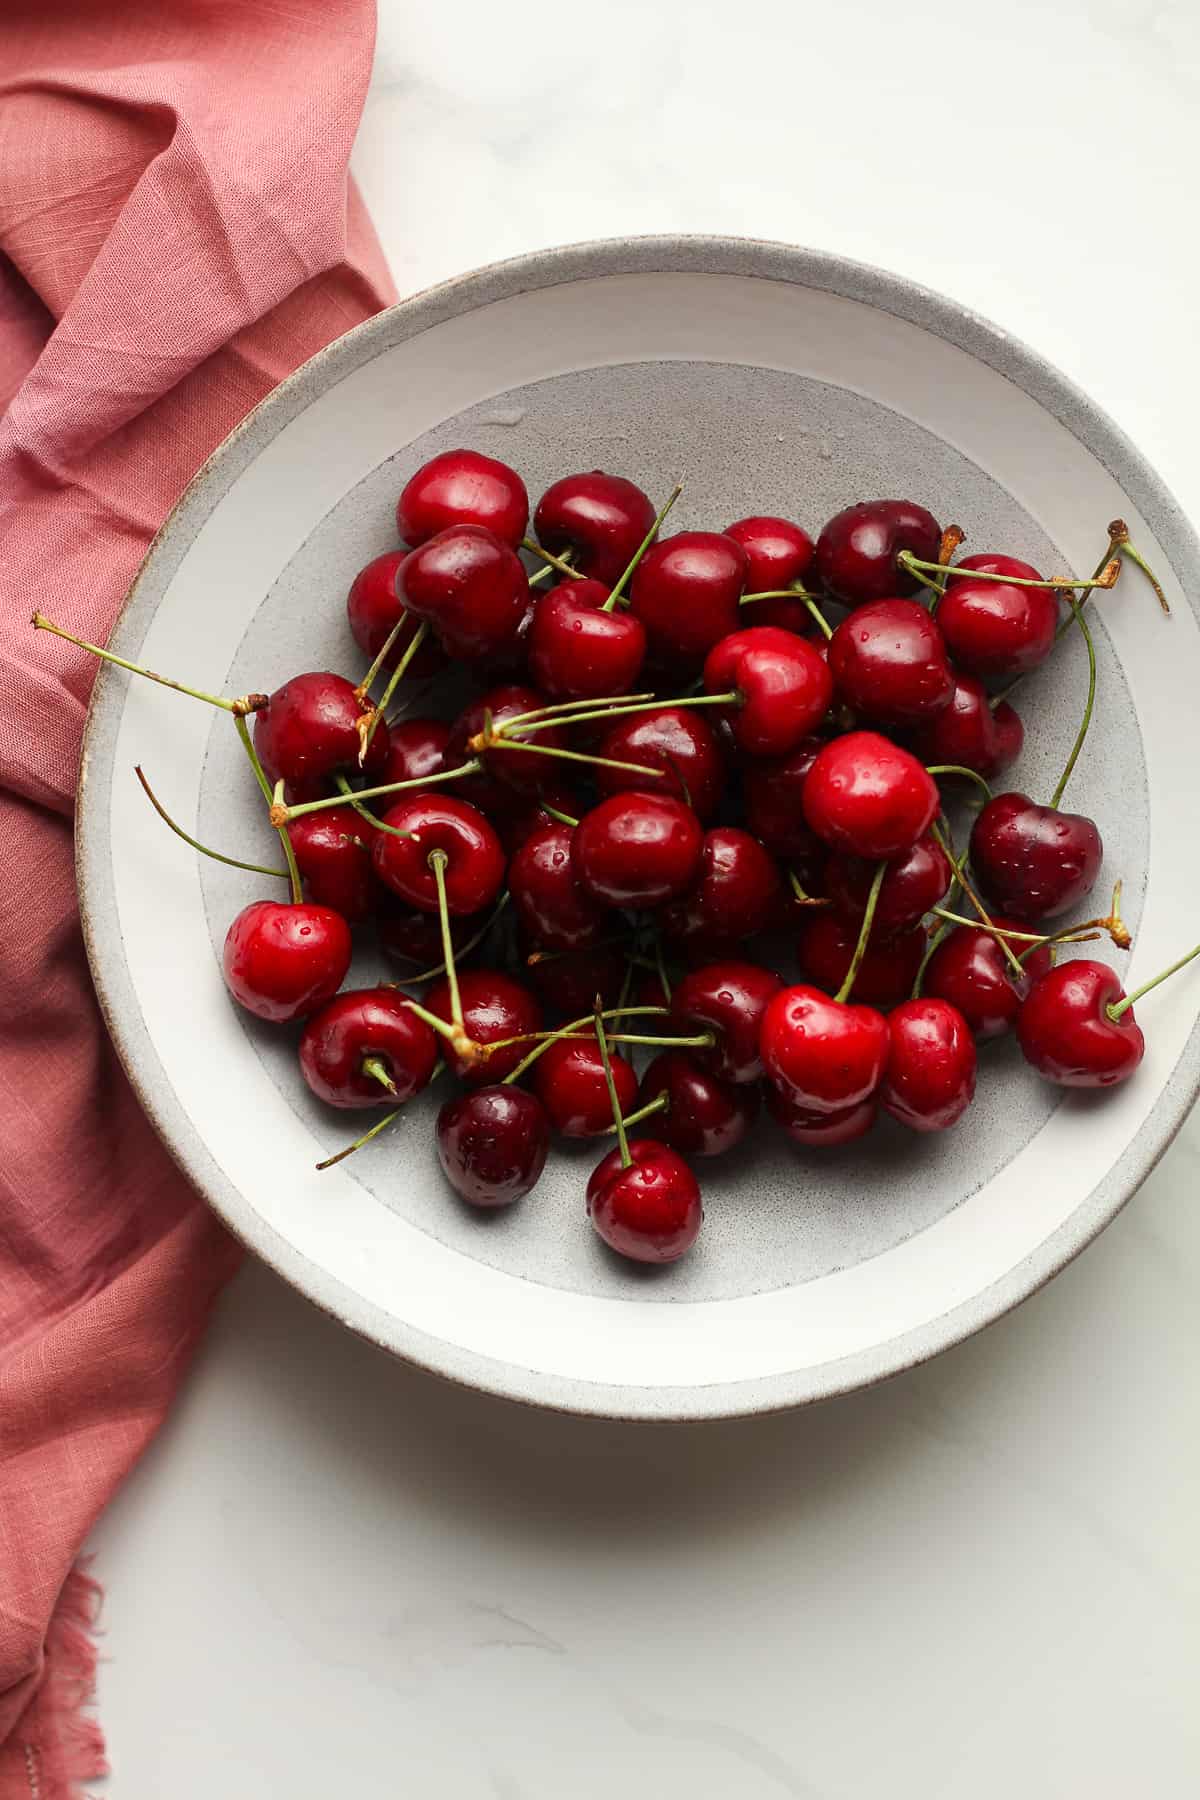 A bowl of red cherries.